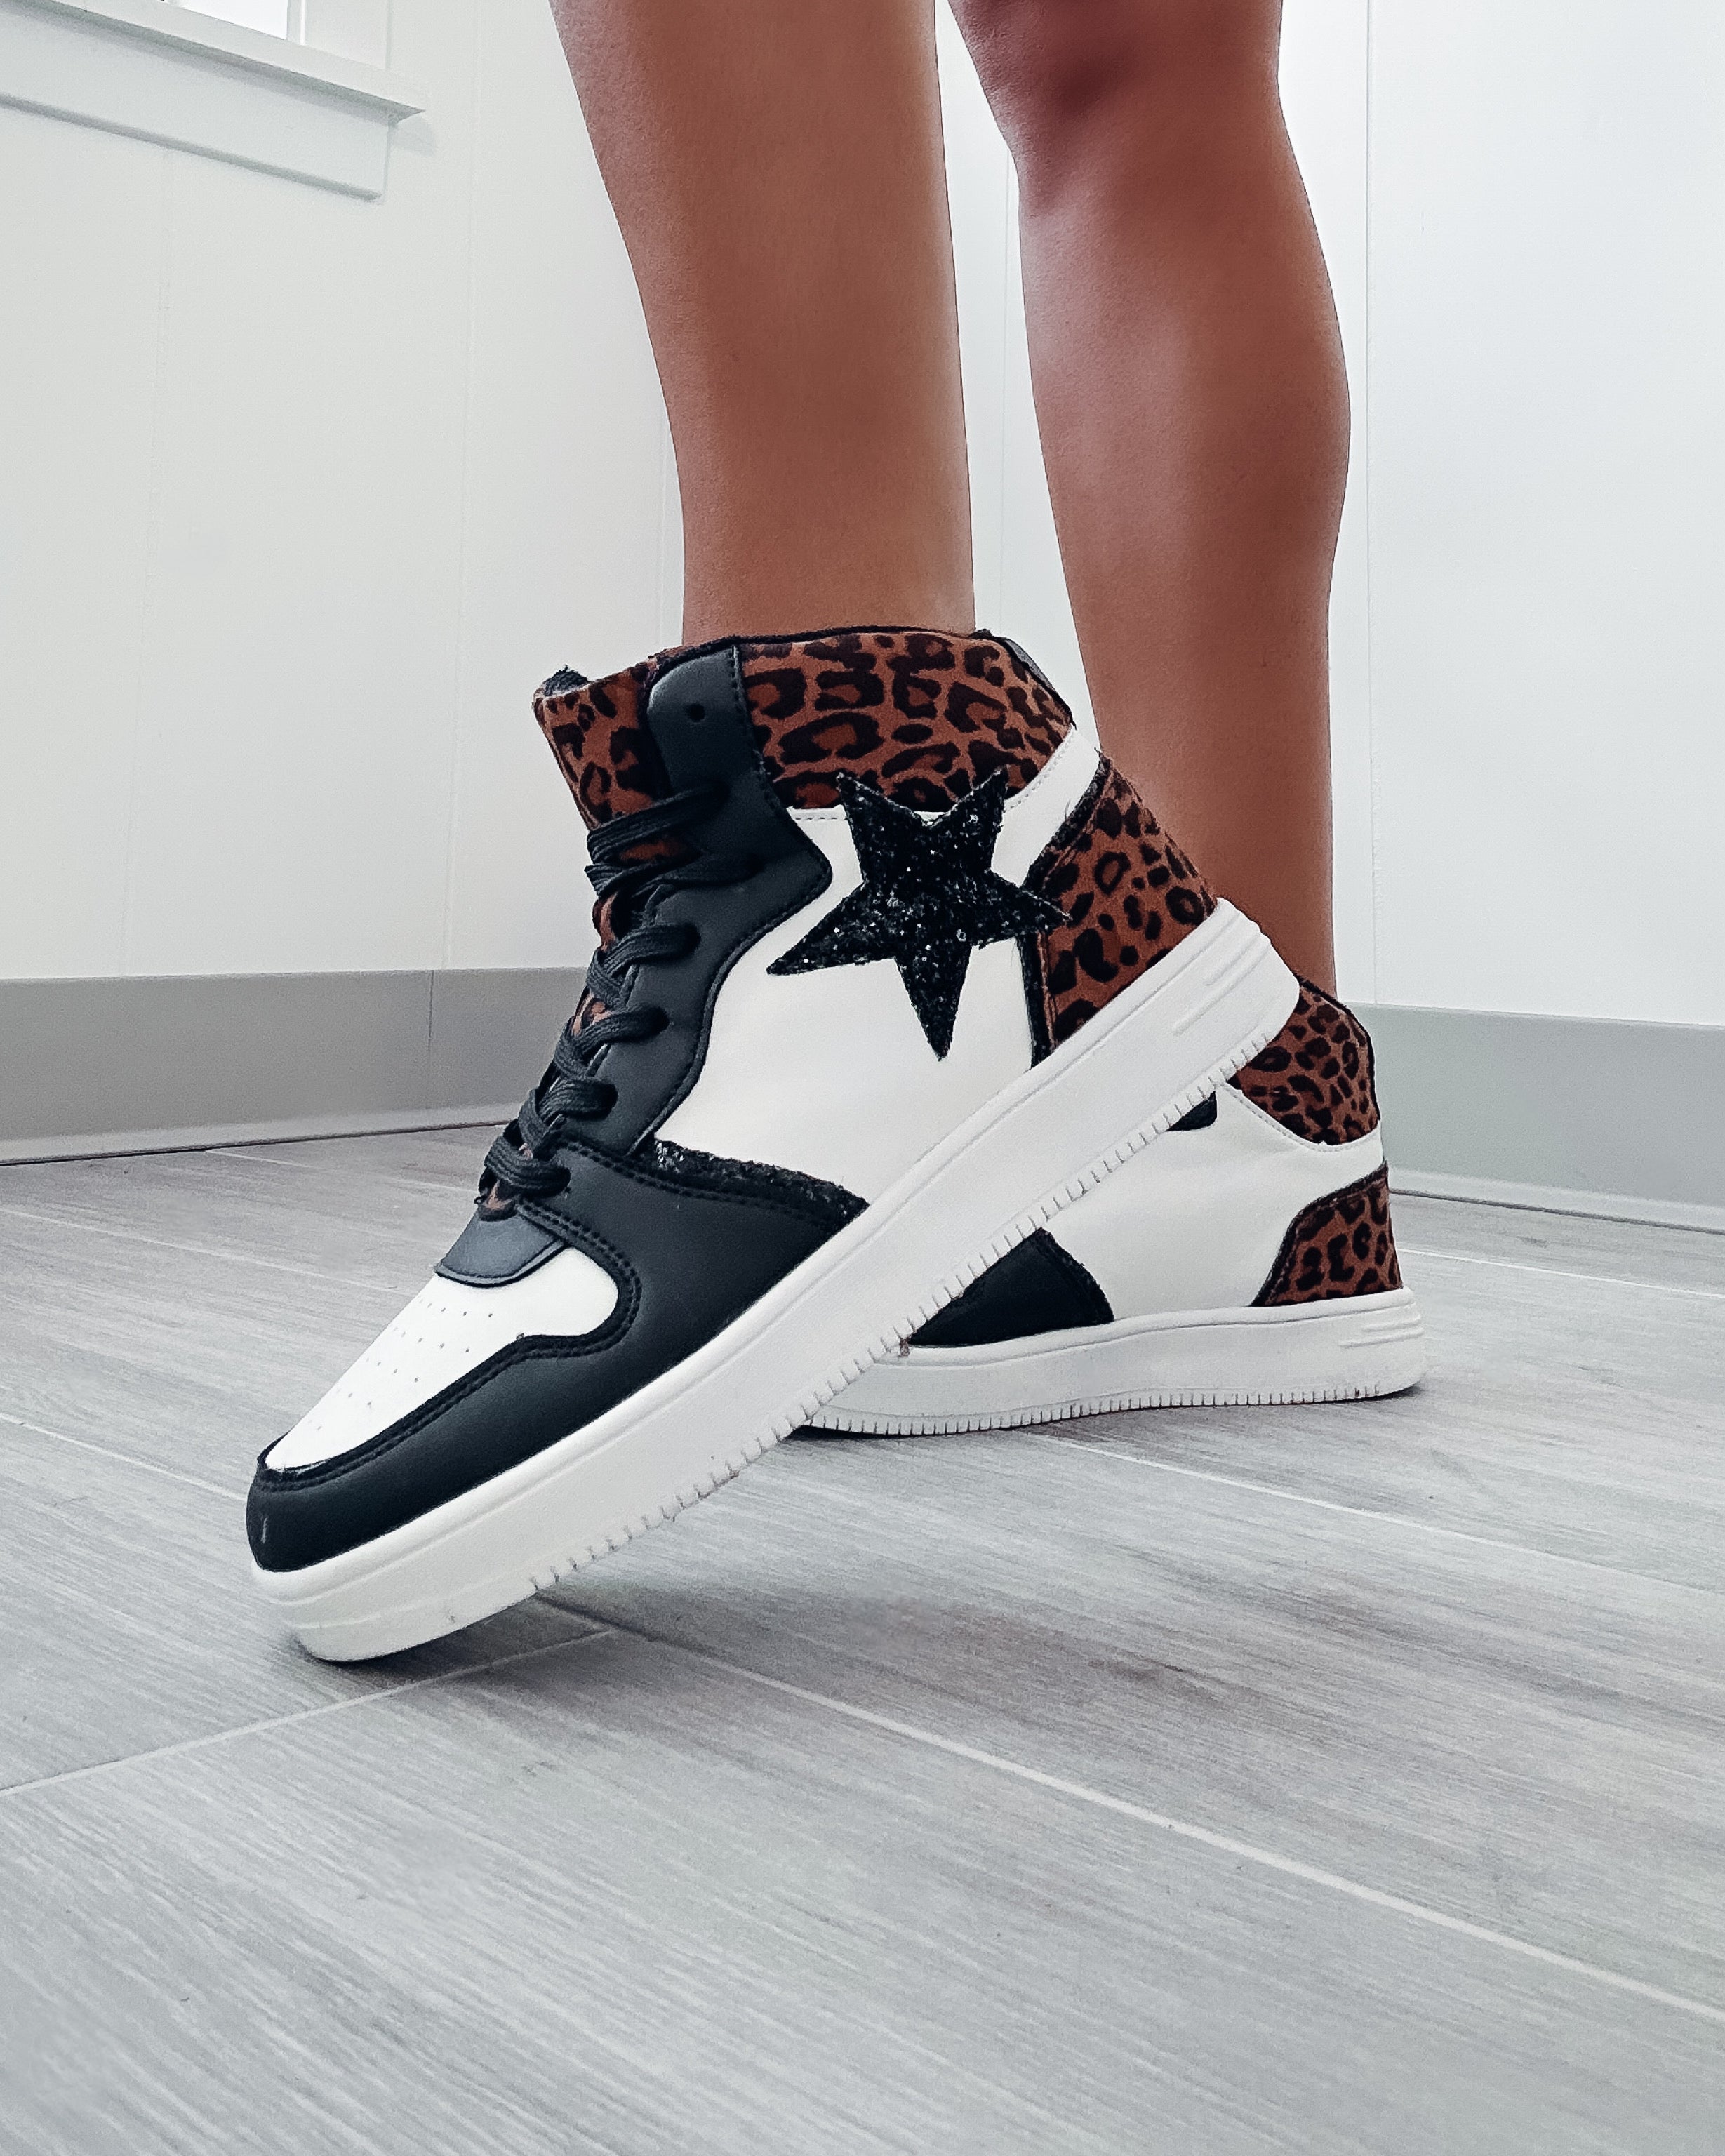 You're A Star Leopard High Top Sneakers